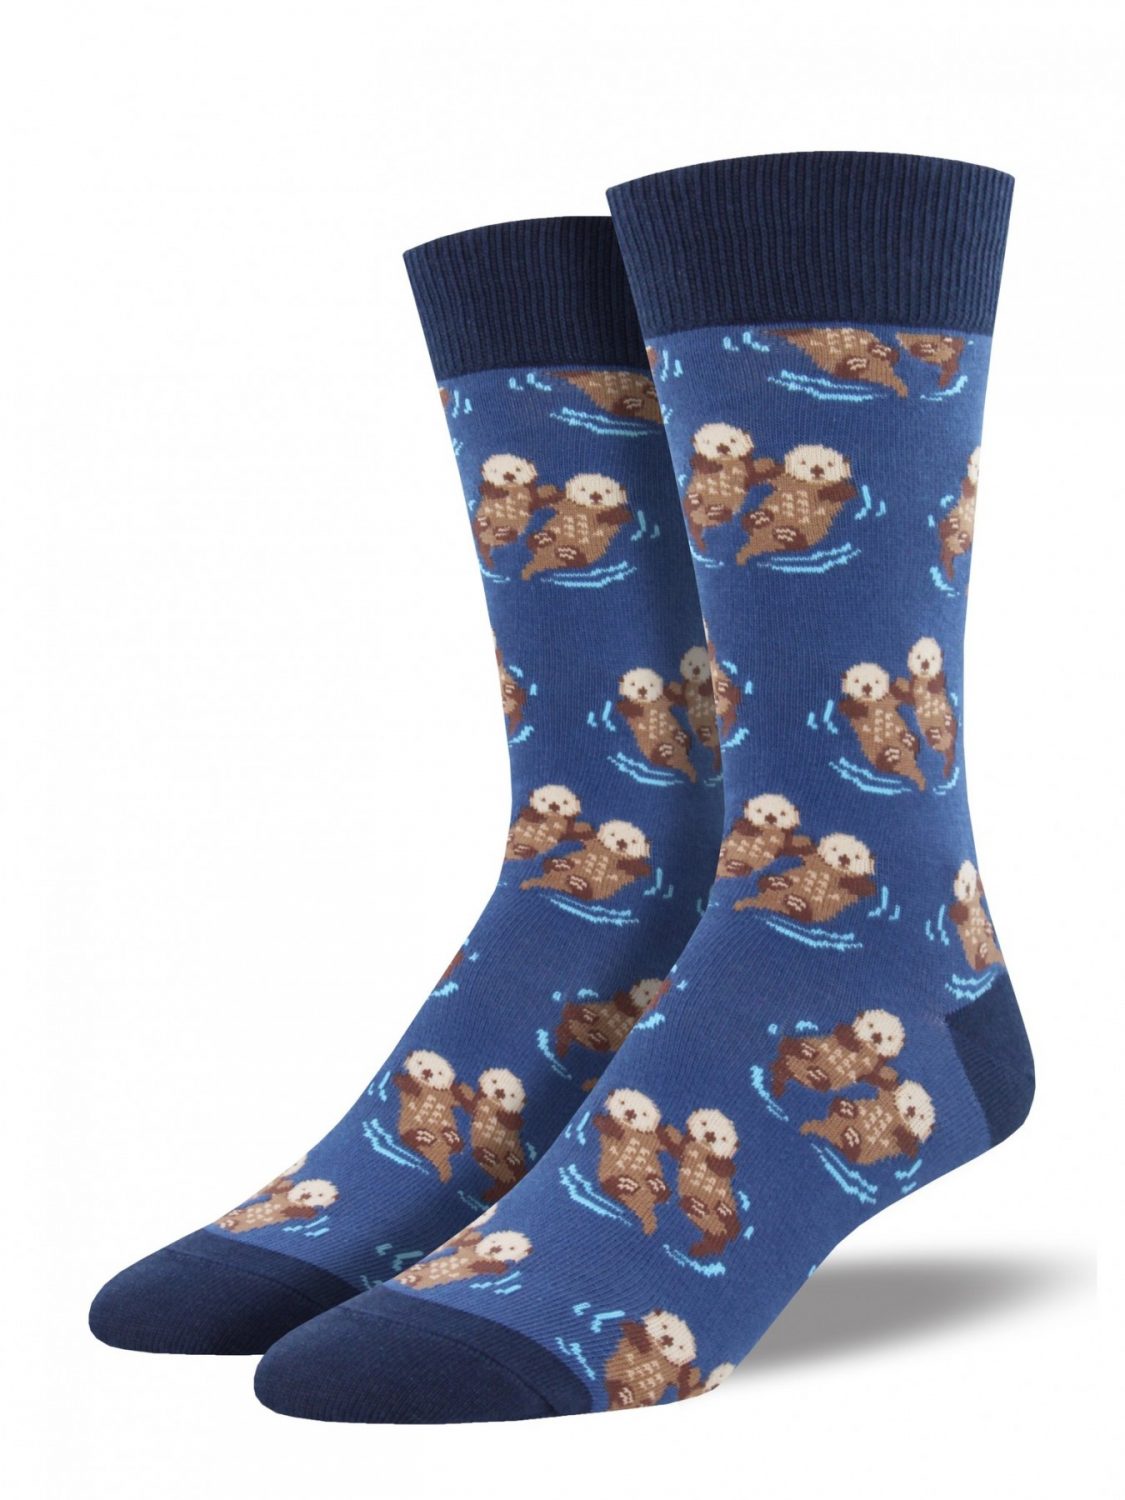 mens blue novelty sock with cute otters holding hands in the sea